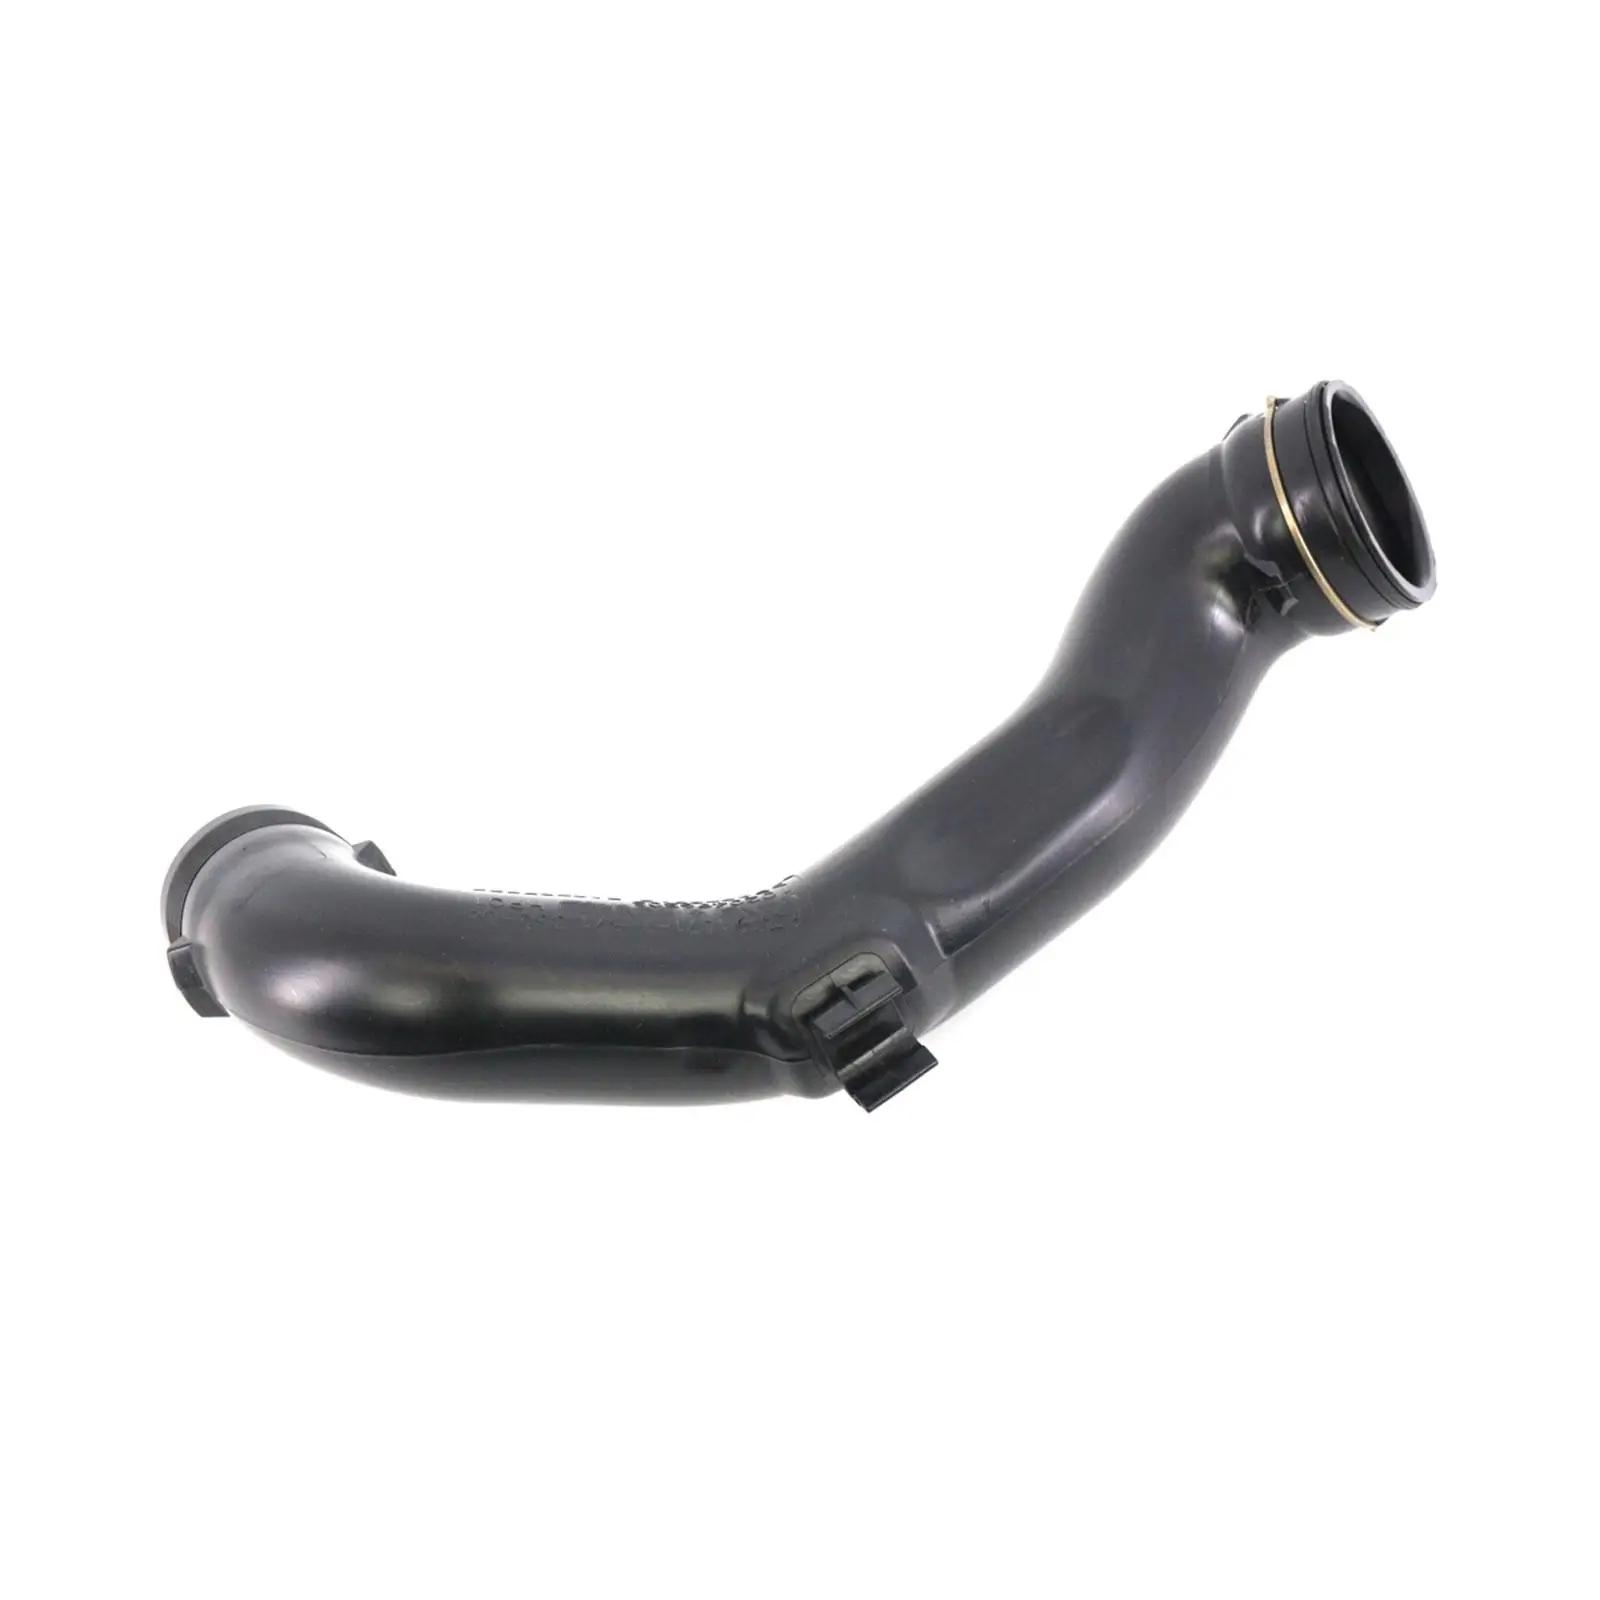 Intake Charge Tube Turbo Hose Charge Air Induction Tract for BMW x5 E70 Lci